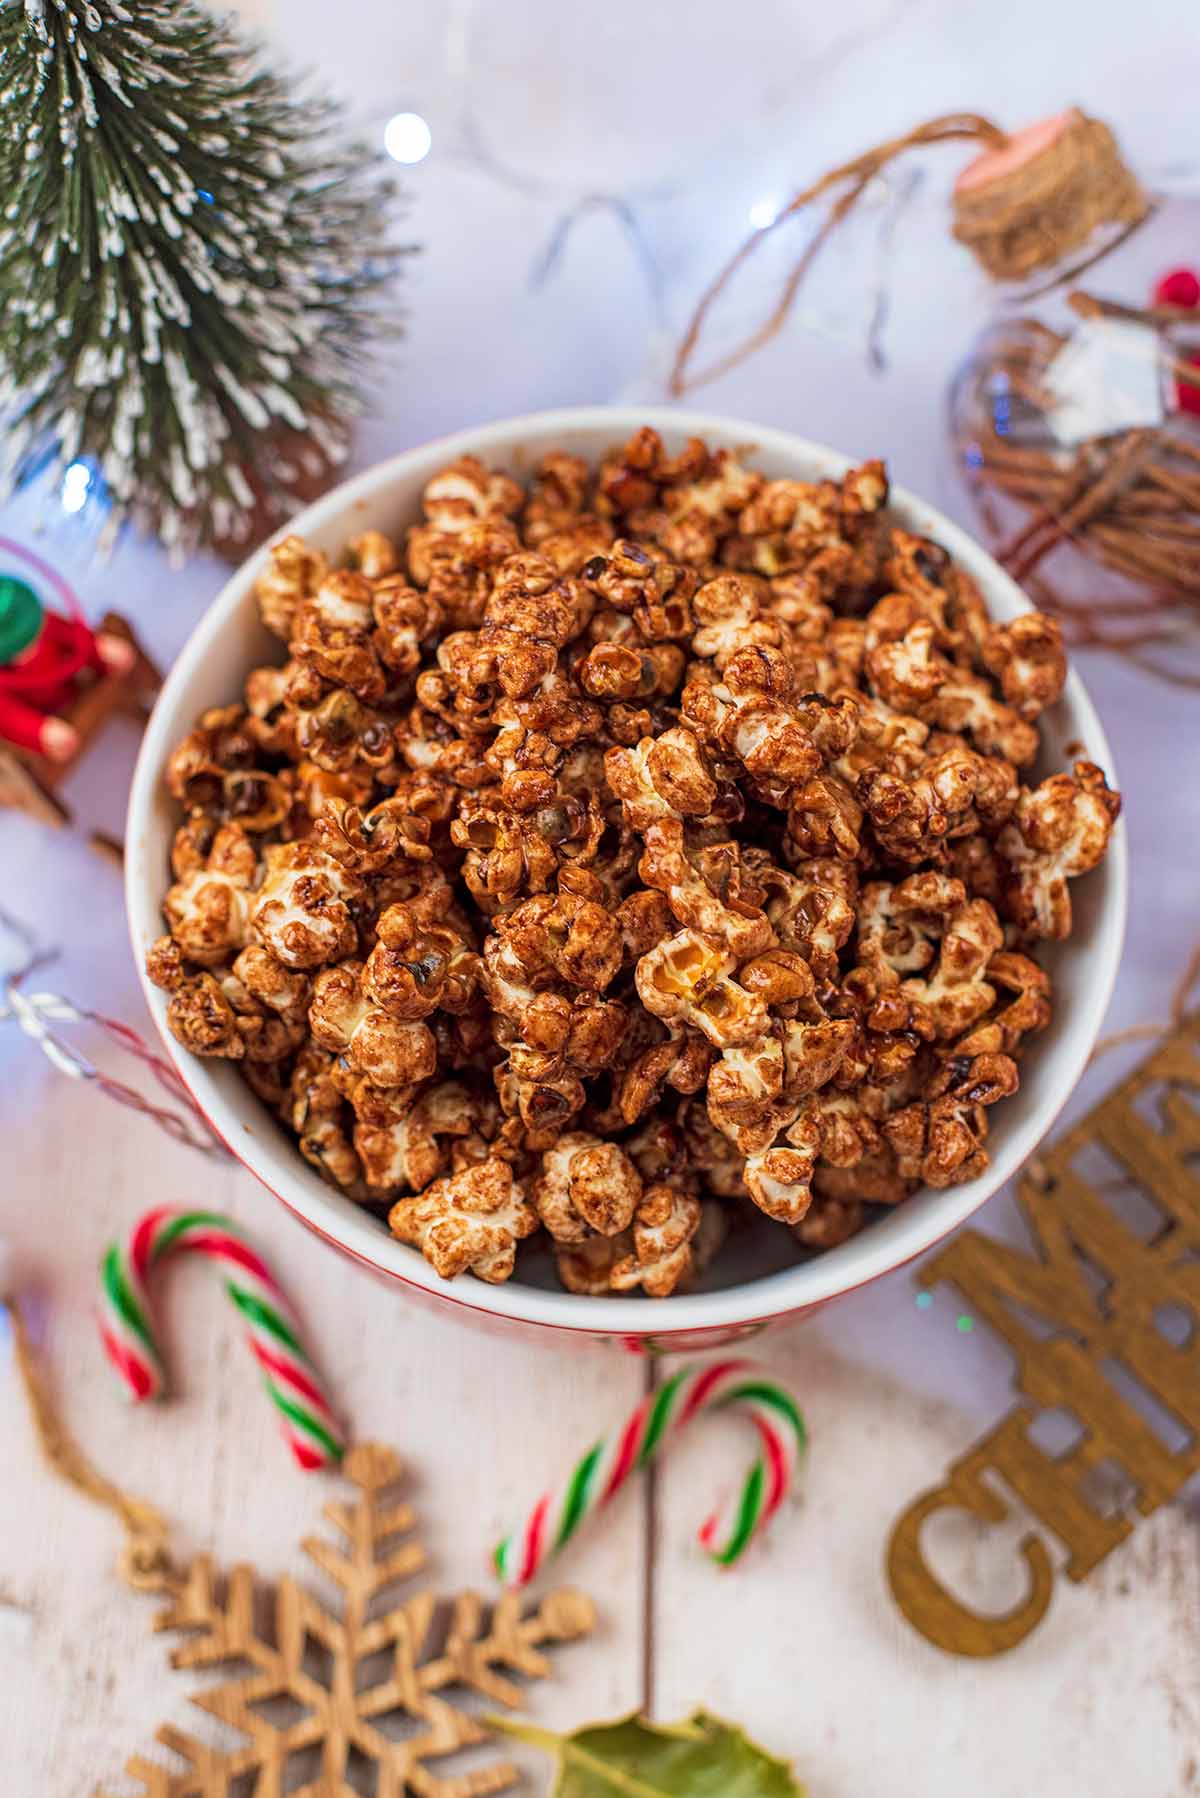 A bowl of popcorn next to Christmas decorations.